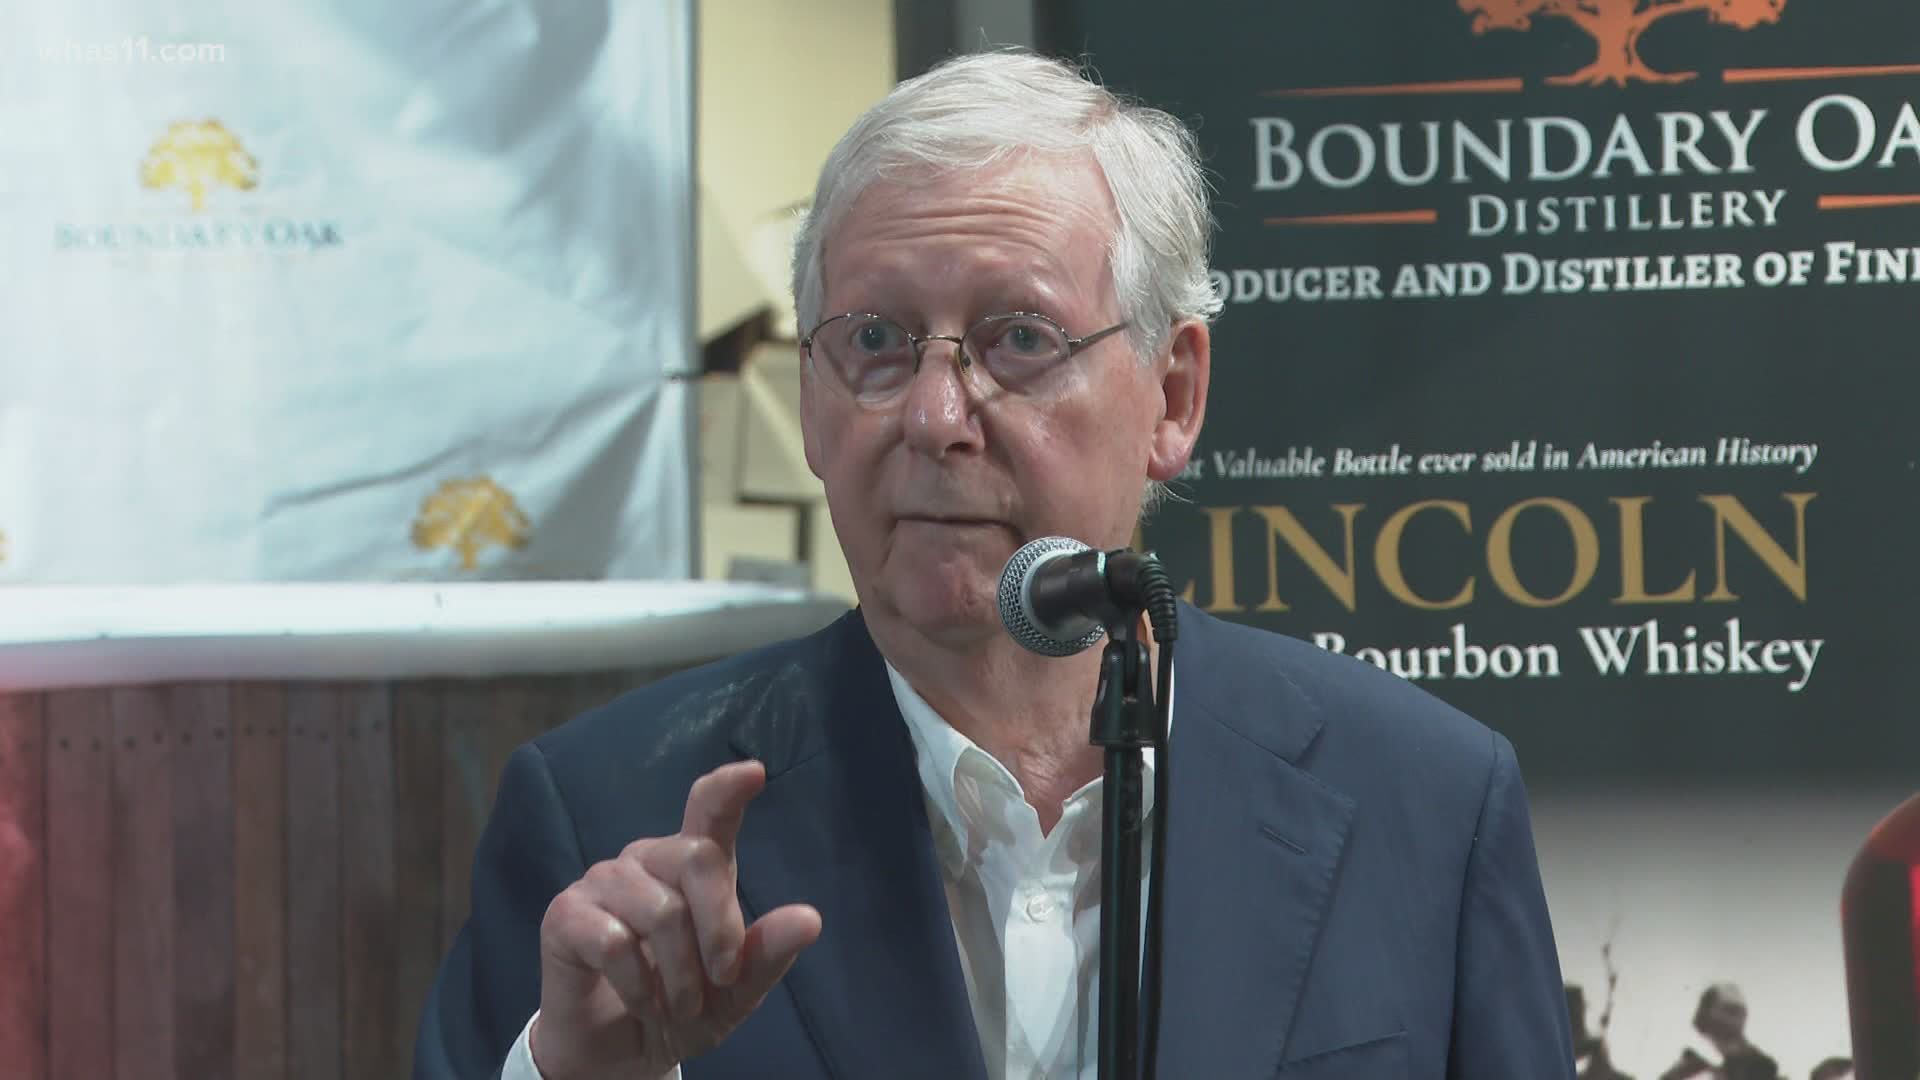 Senate Majority leader Mitch McConnell said Kentucky has only spent six percent of the money from the first coronavirus aid package.